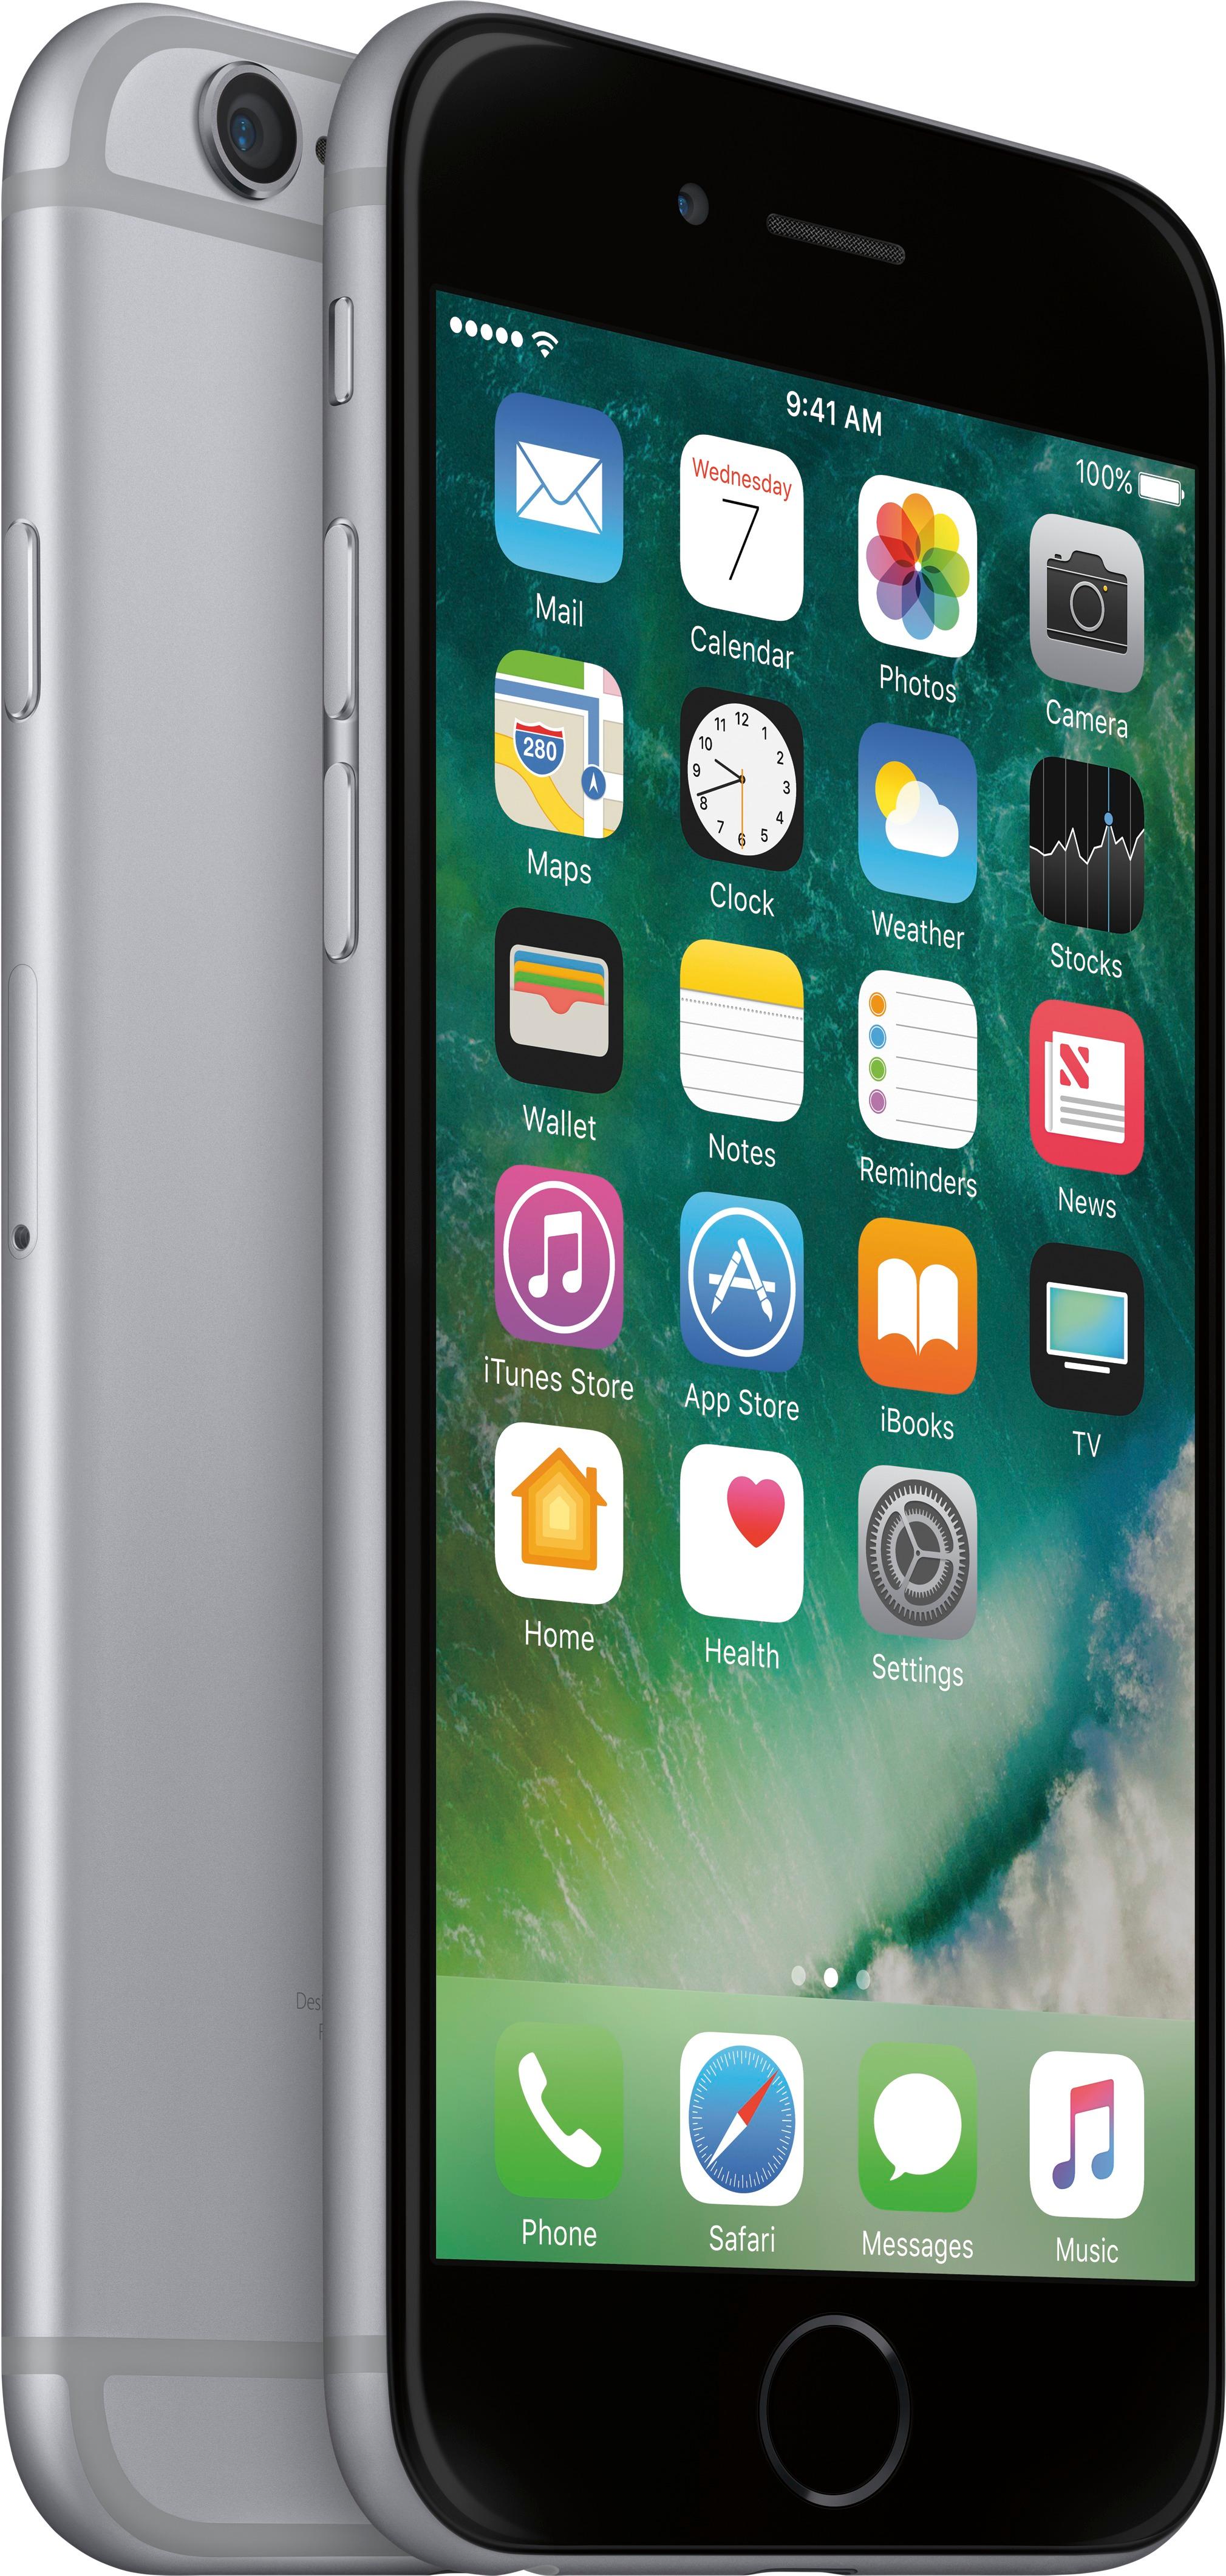 Customer Reviews: Total Wireless Apple iPhone 6 4G LTE with 32GB Memory ...